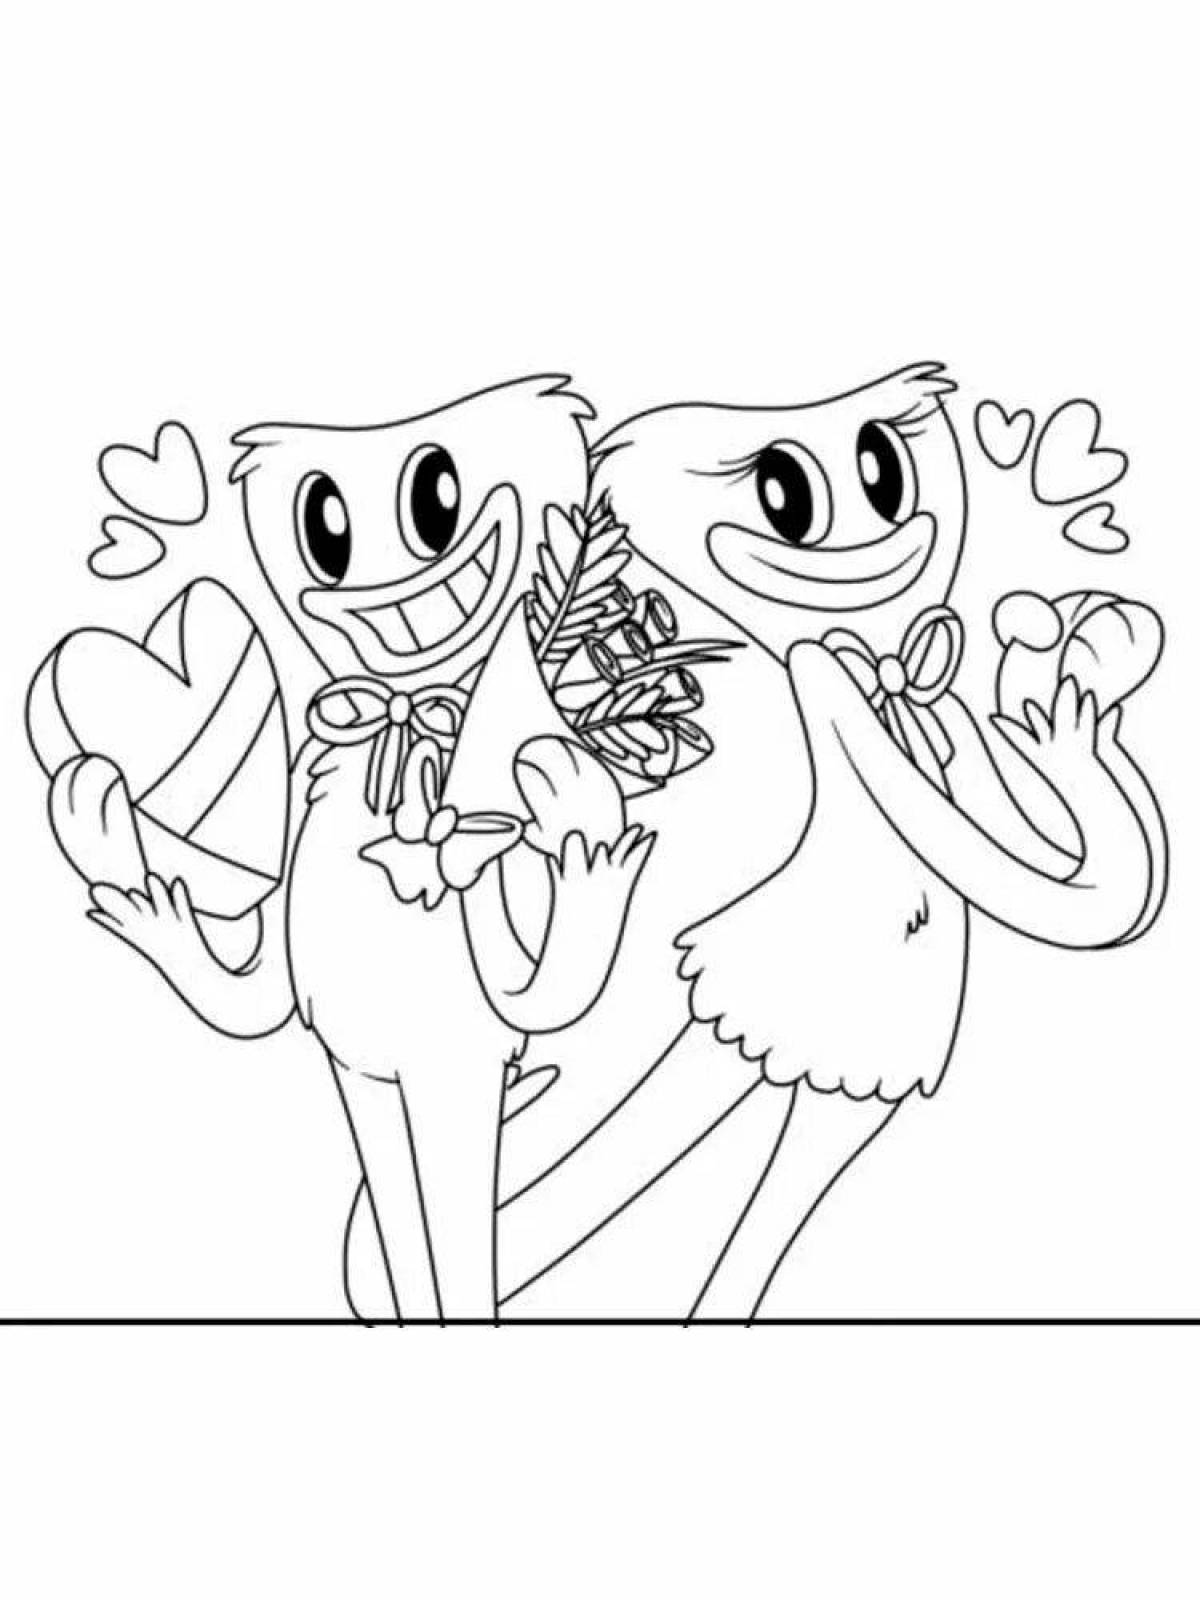 Cute killy willy coloring page